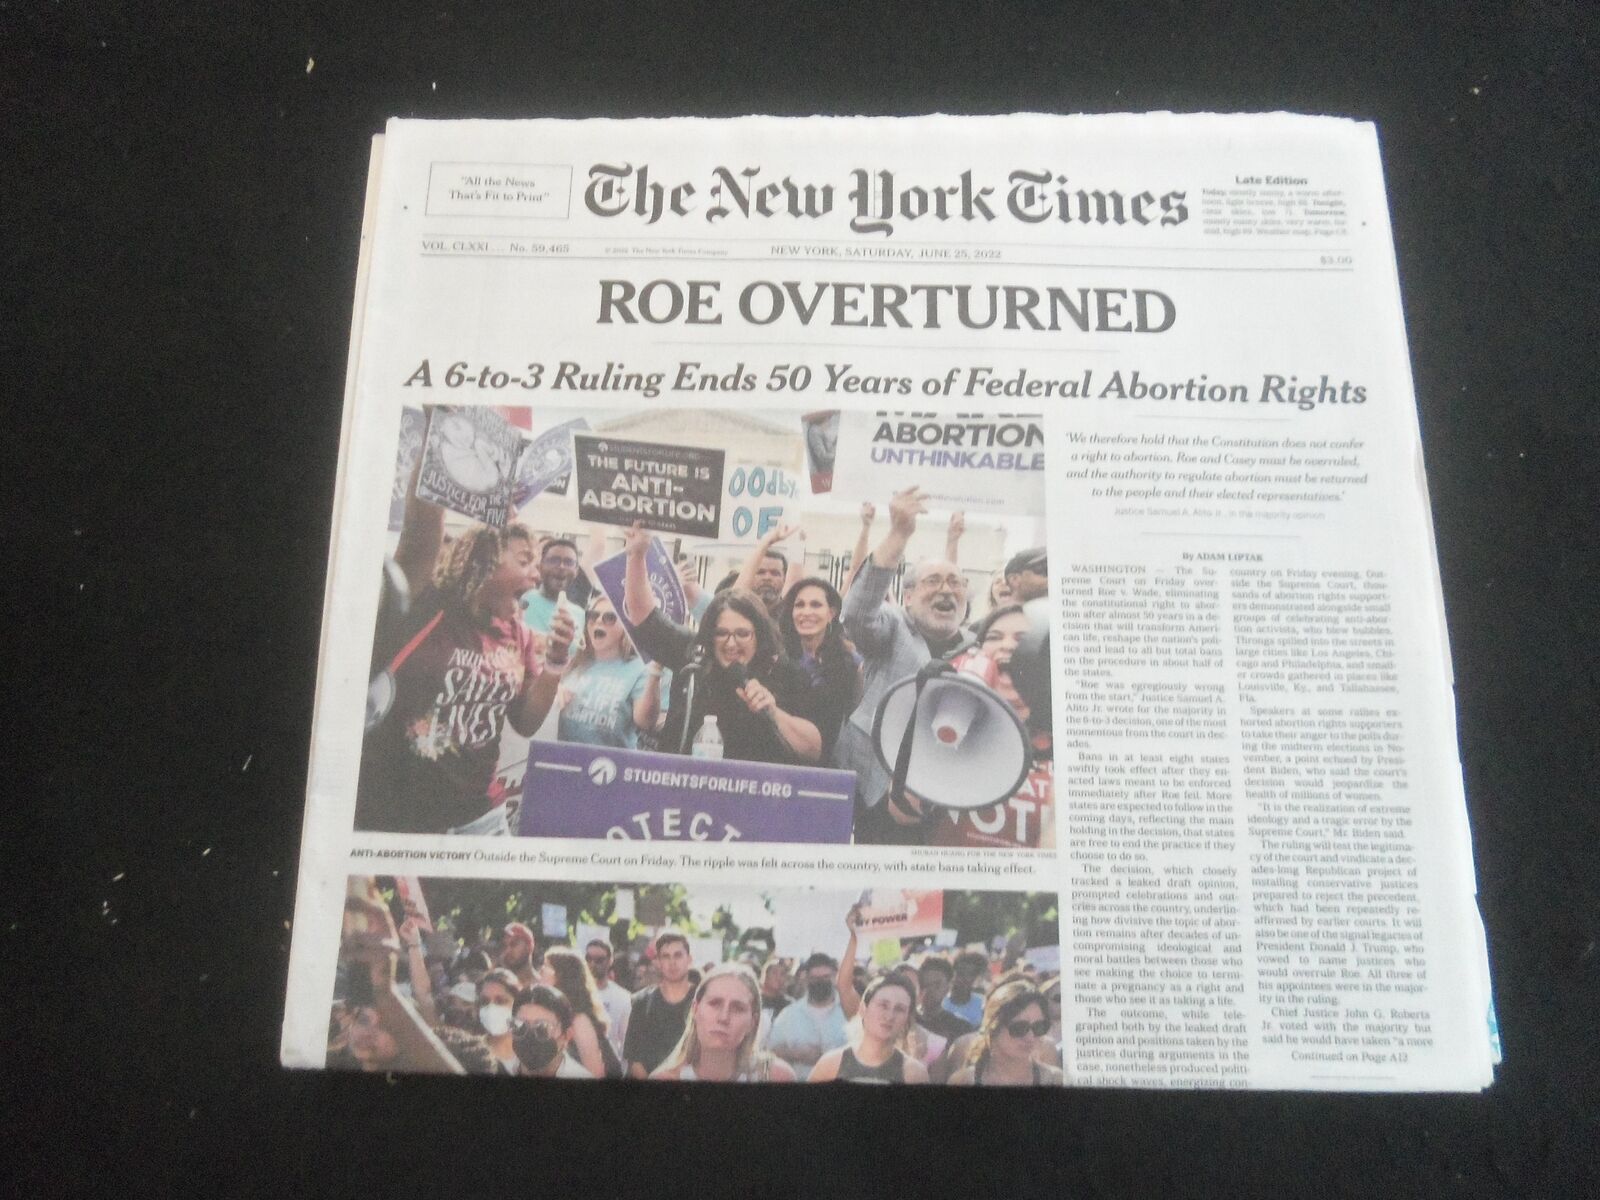 2022 JUNE 25 NEW YORK TIMES - ROE OVERTURNED IN 6-TO-3 RULING, ENDS 50 YEARS